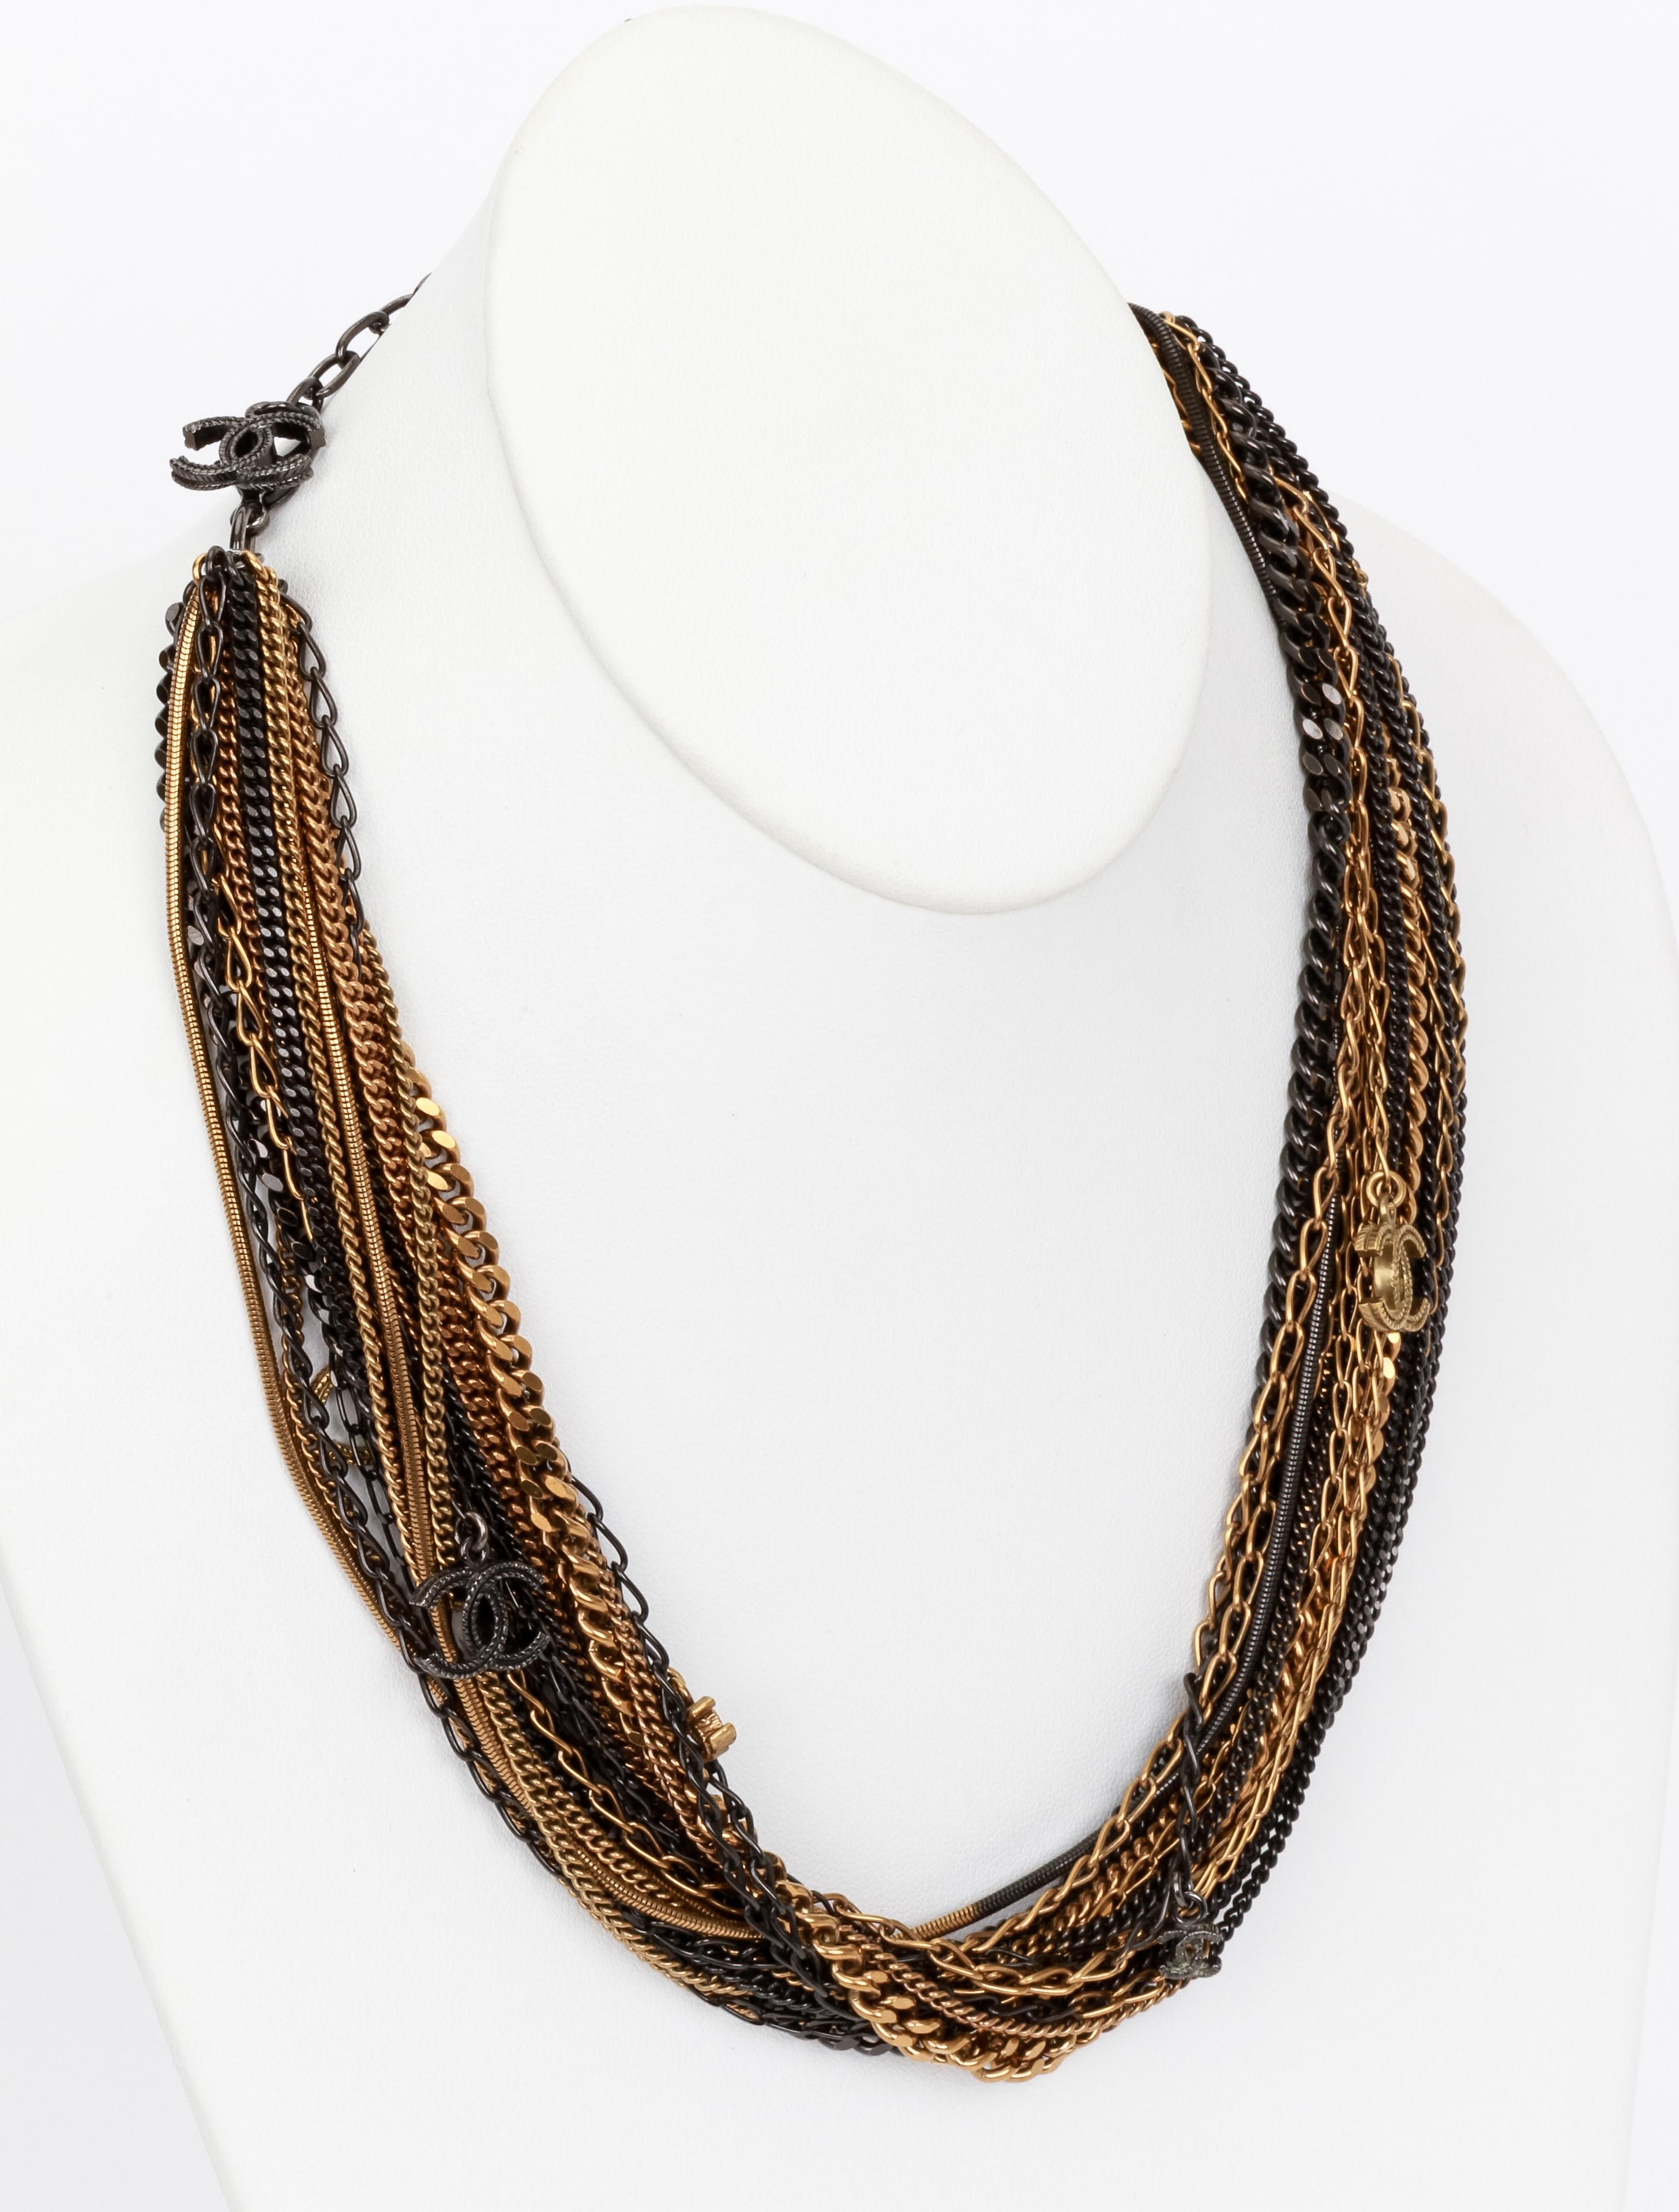 Chanel torsade chain necklace with twenty two different chain in black and gold color playing on layers and texture to create a compelling look. CC logo charms and clasp with adjustable length. Comes with original pouch.